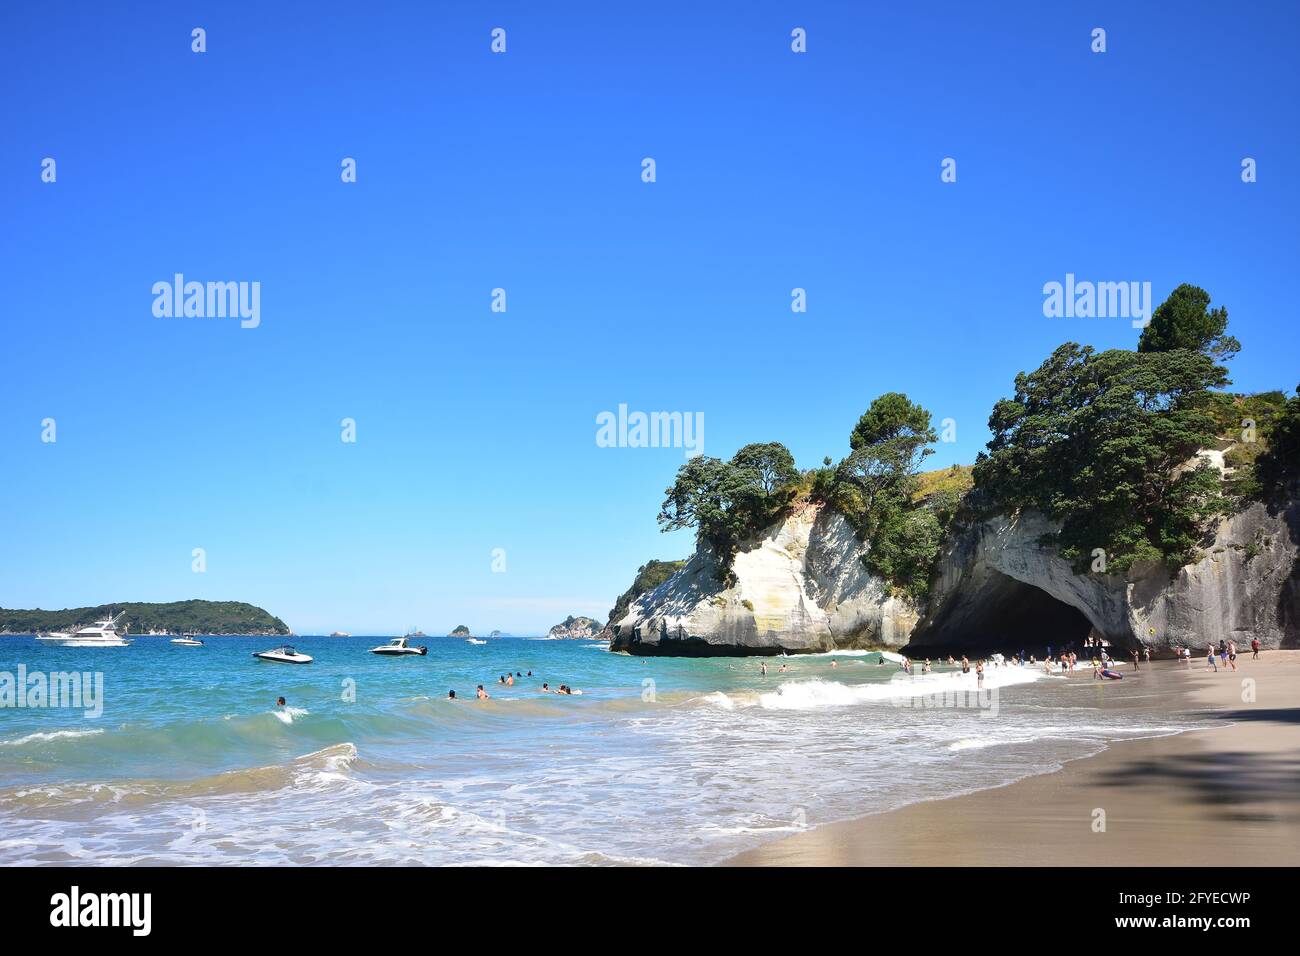 Holidaymakers playing and swimming in surf waves coming to sandy beach on Cathedral Cove with anchored boats and distant islands in background. Stock Photo